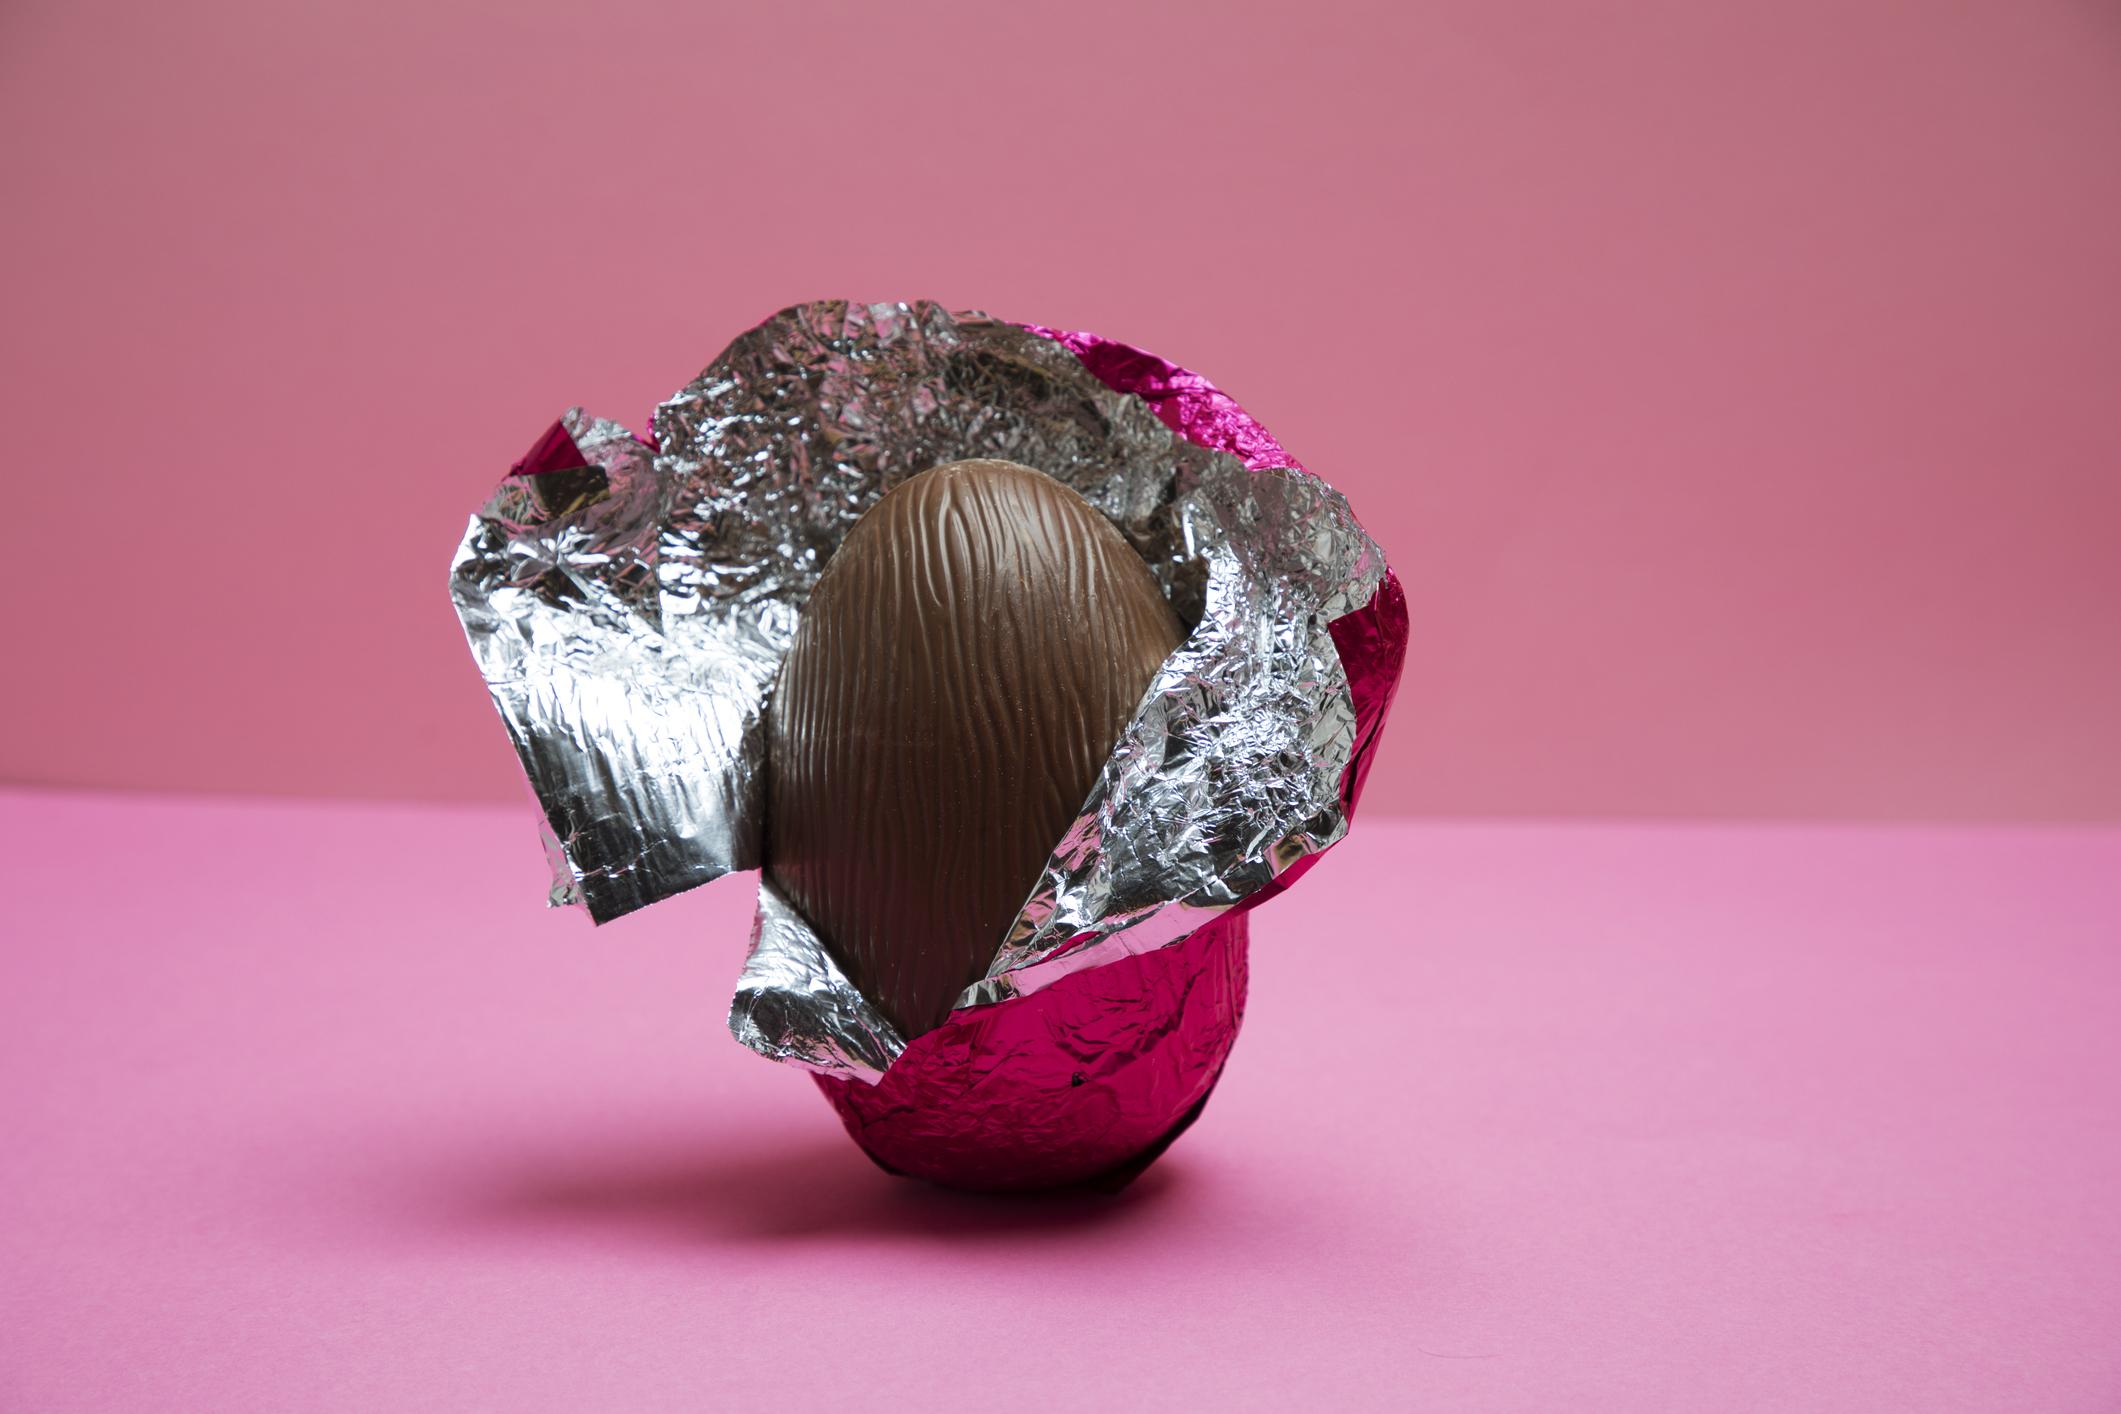  A half unwrapped Easter egg on a pink background 